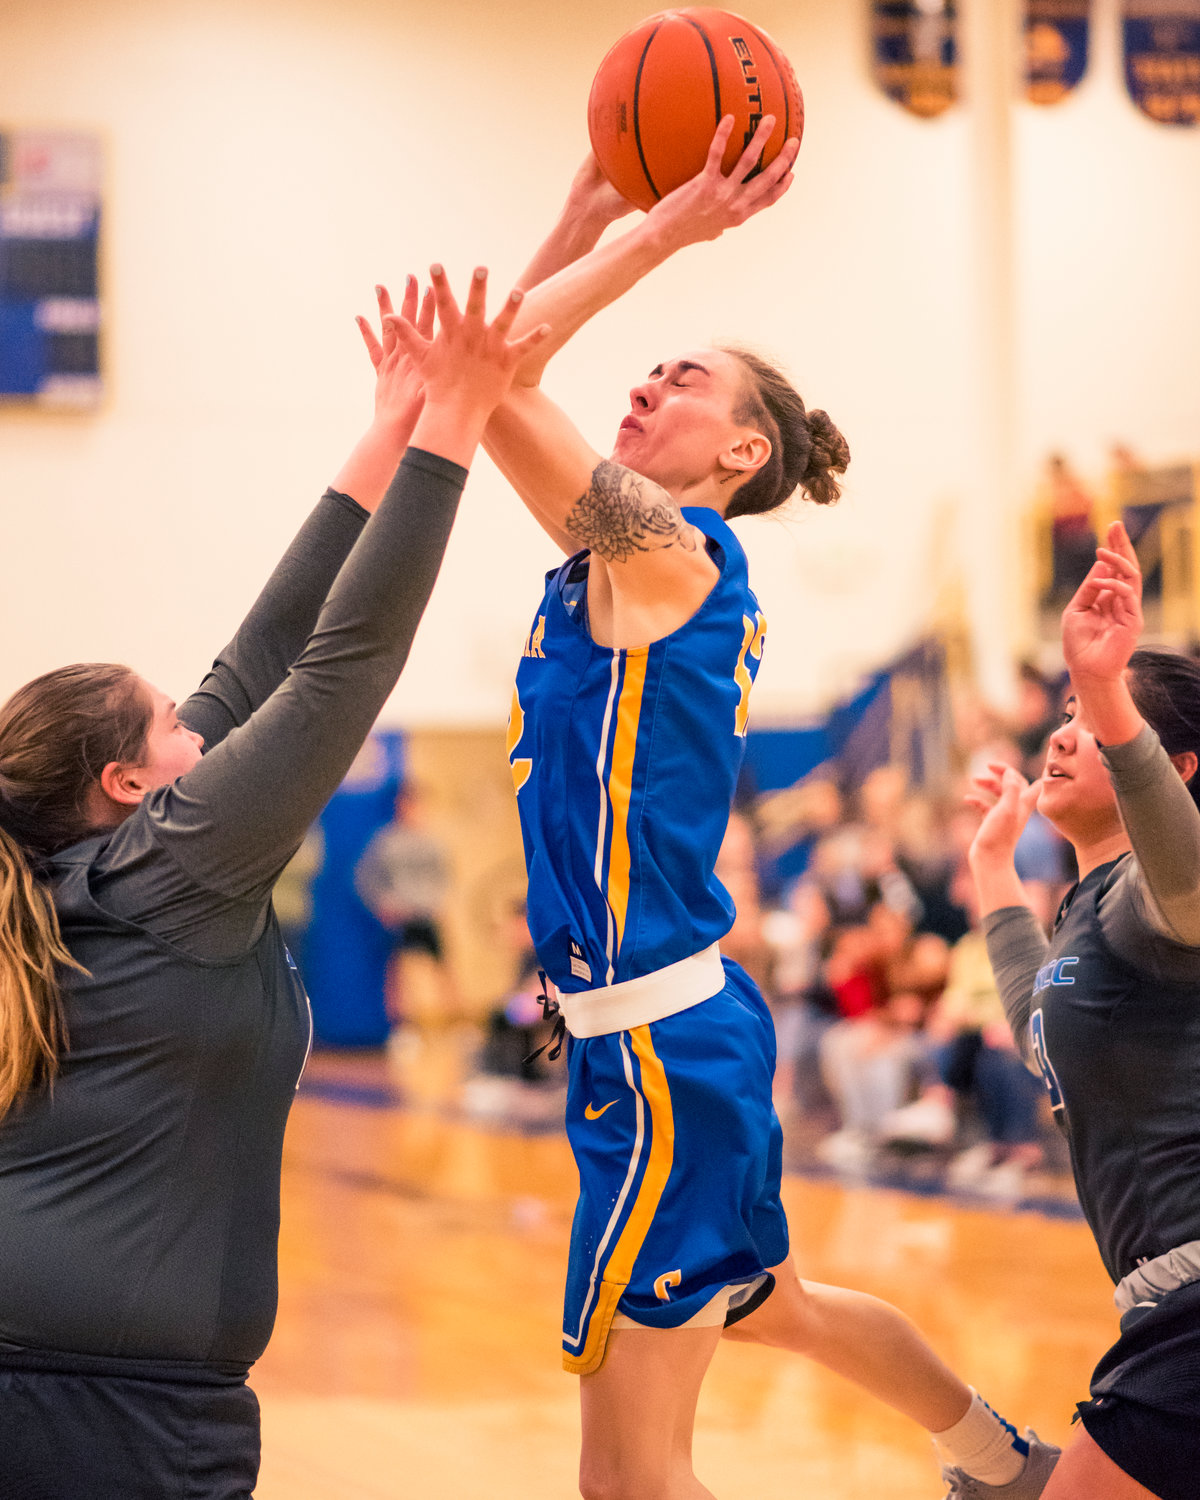 Centralia's Caitlinn Yenne (12) goes up for a shot during a women's basketball game against S.P.S.C.C Wednesday night at Centralia College.